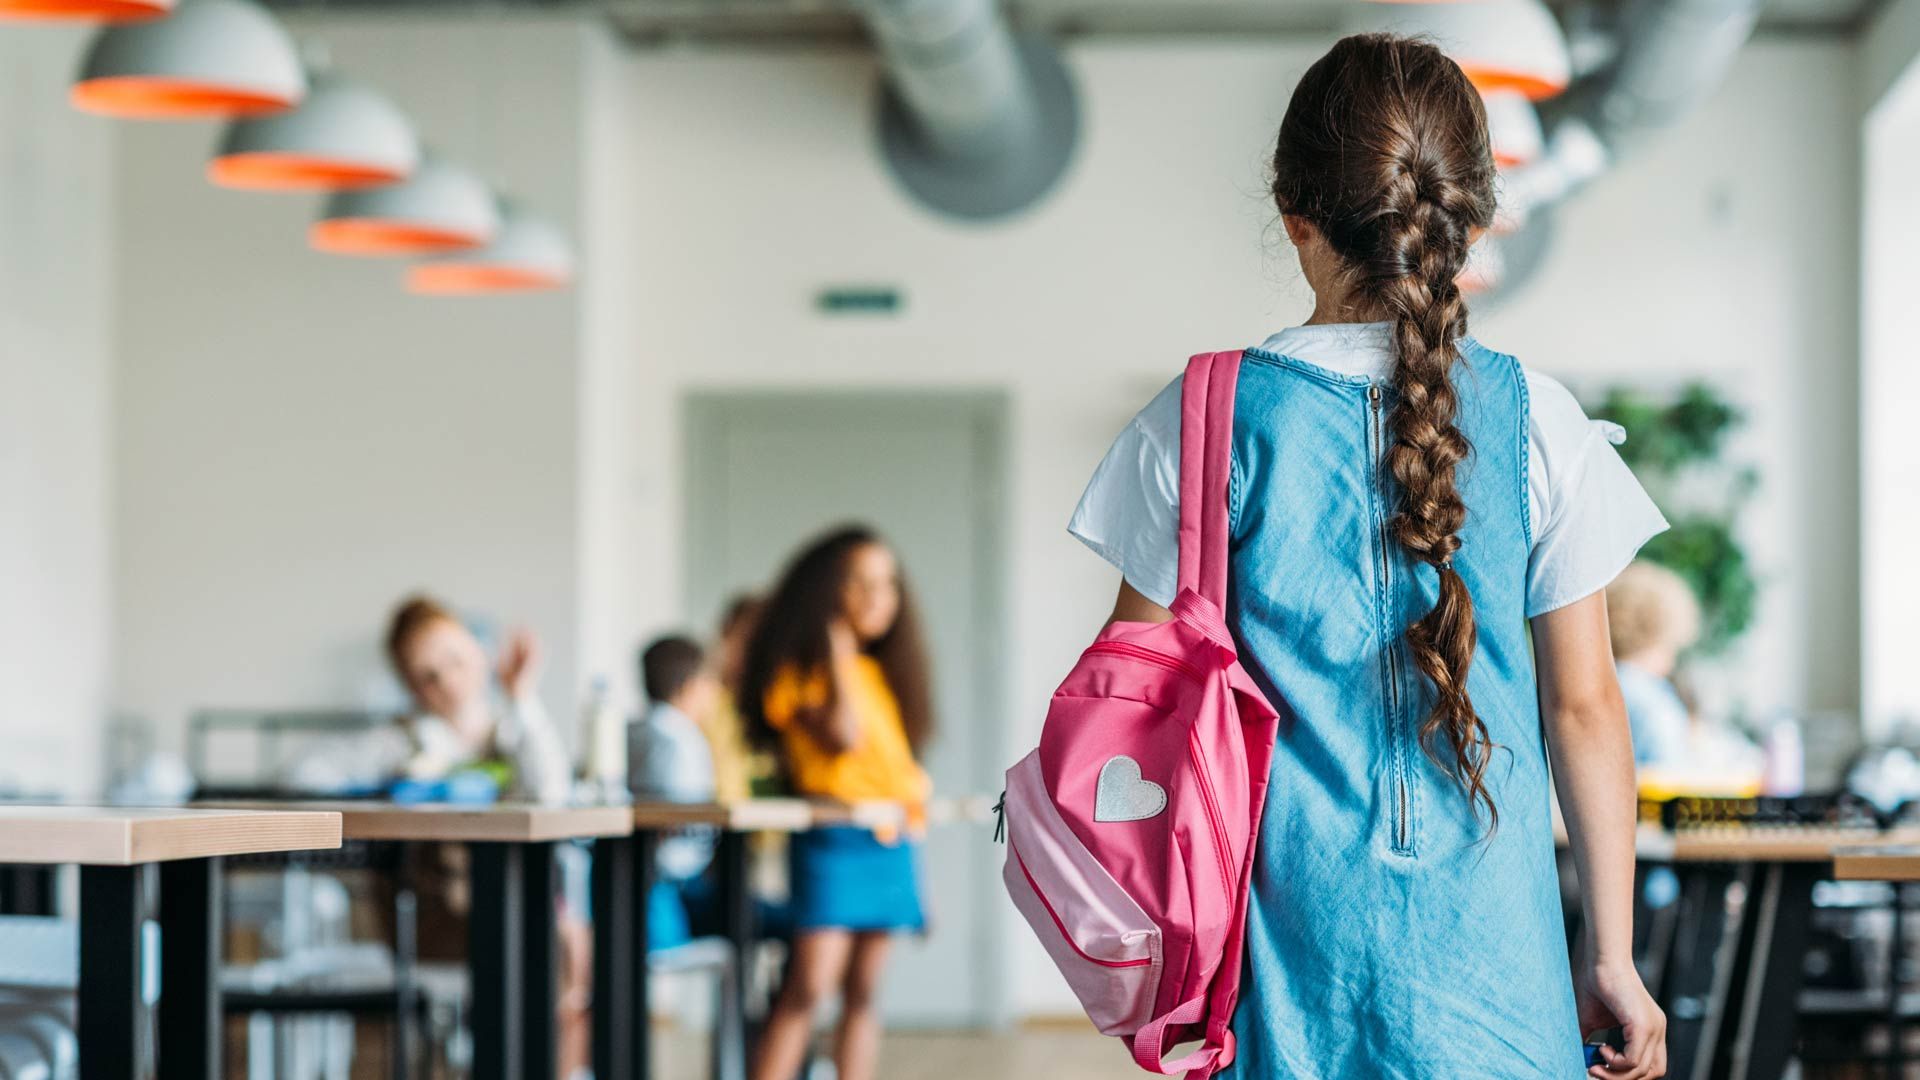 5 Tips to Ease Kids’ Back-To-School Anxiety